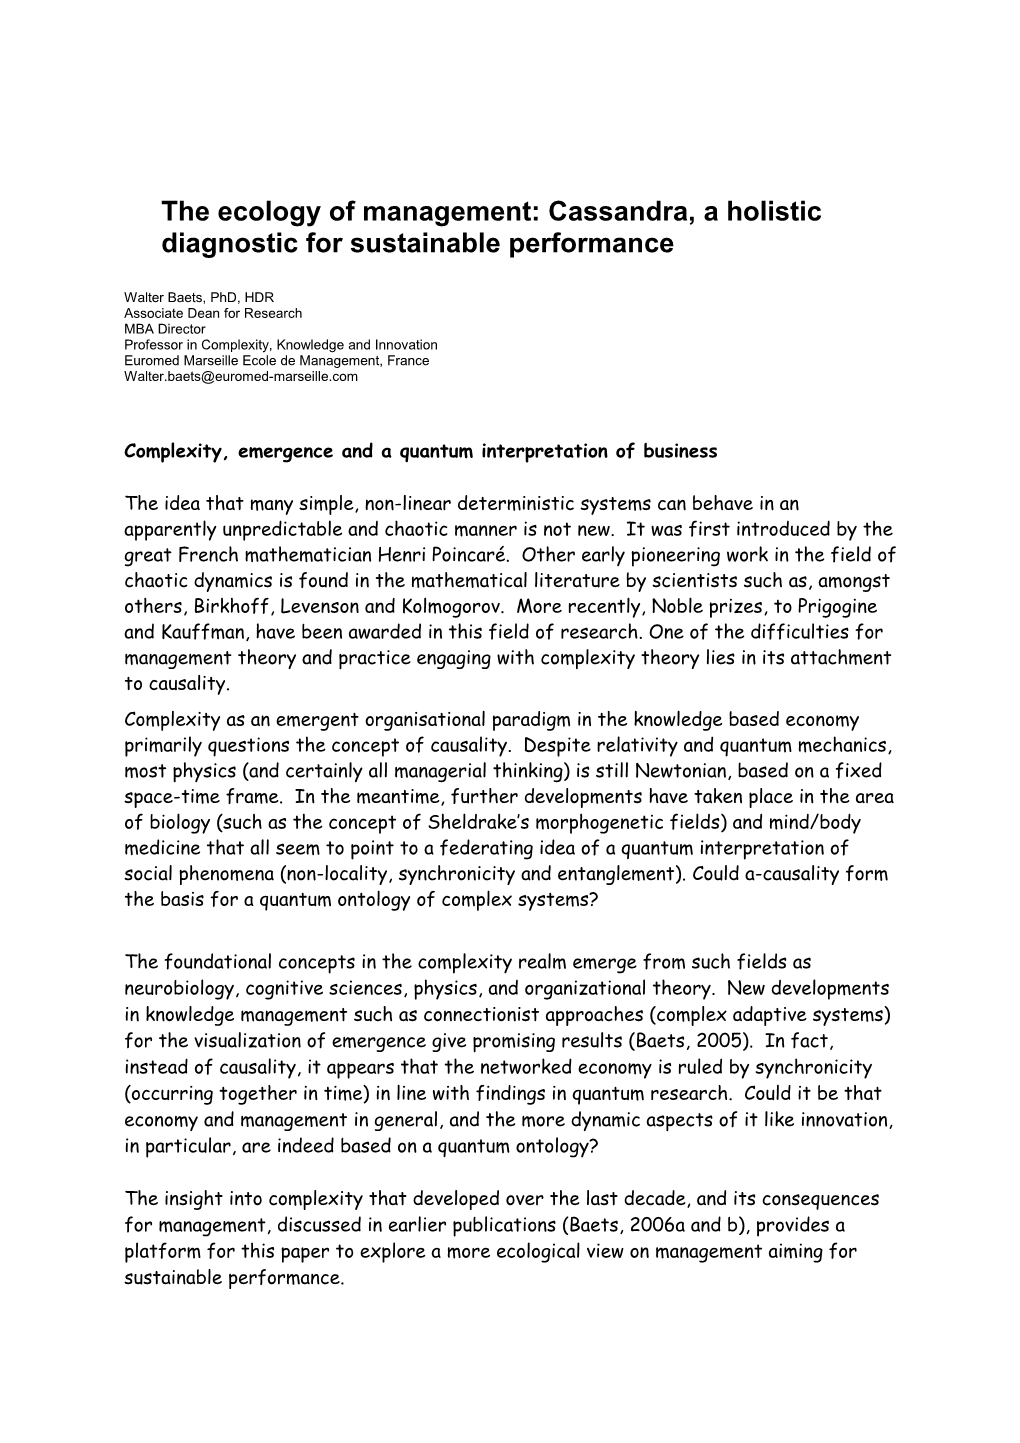 The Ecology of Management: Cassandra, a Holistic Diagnostic for Sustainable Performance